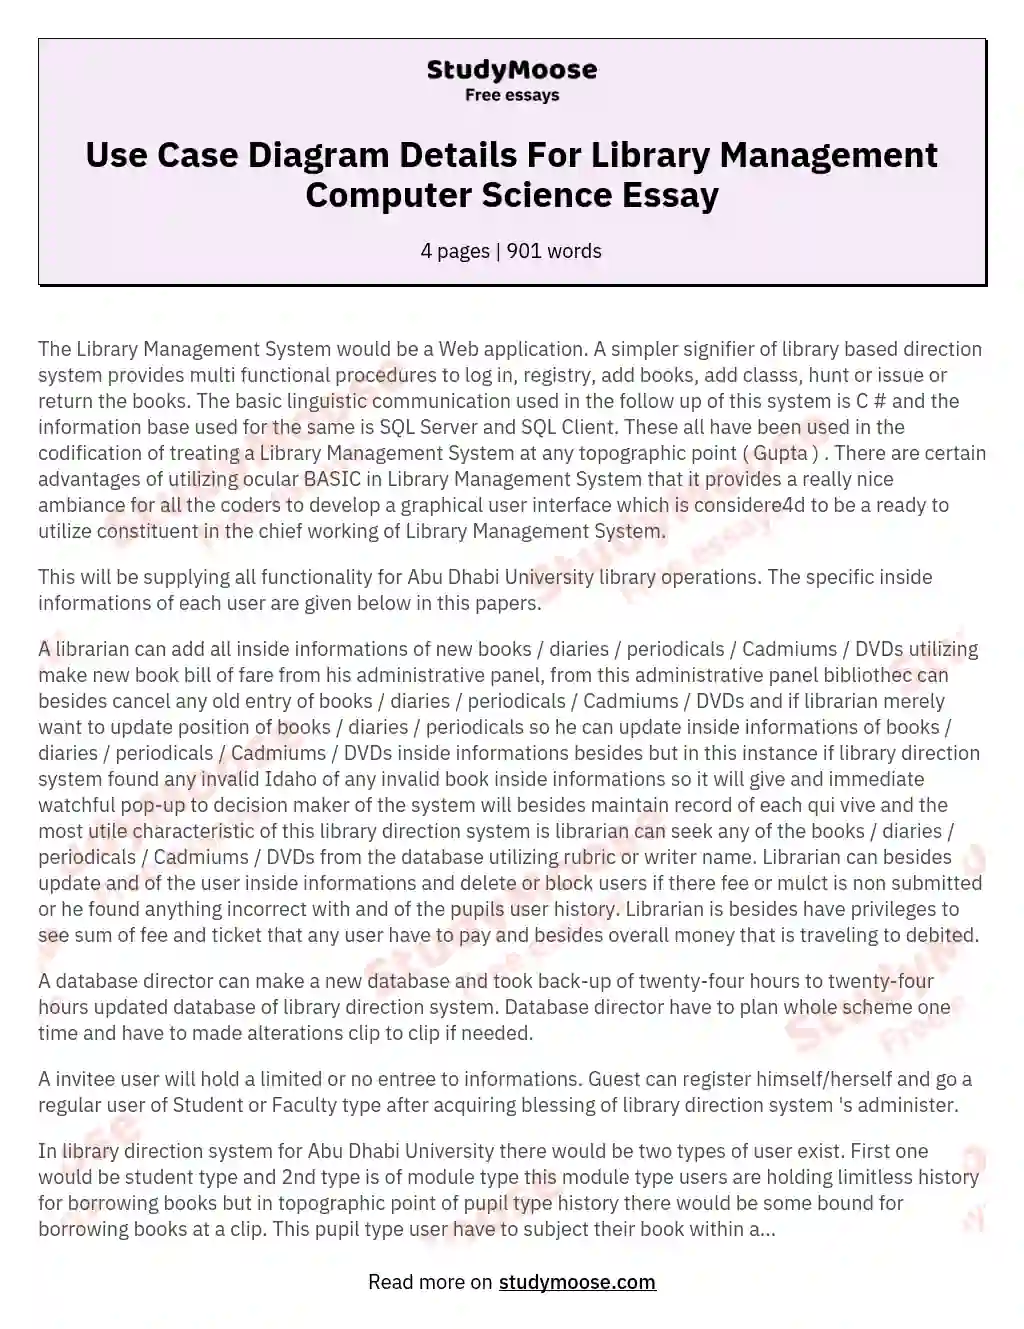 Use Case Diagram Details For Library Management Computer Science Essay essay